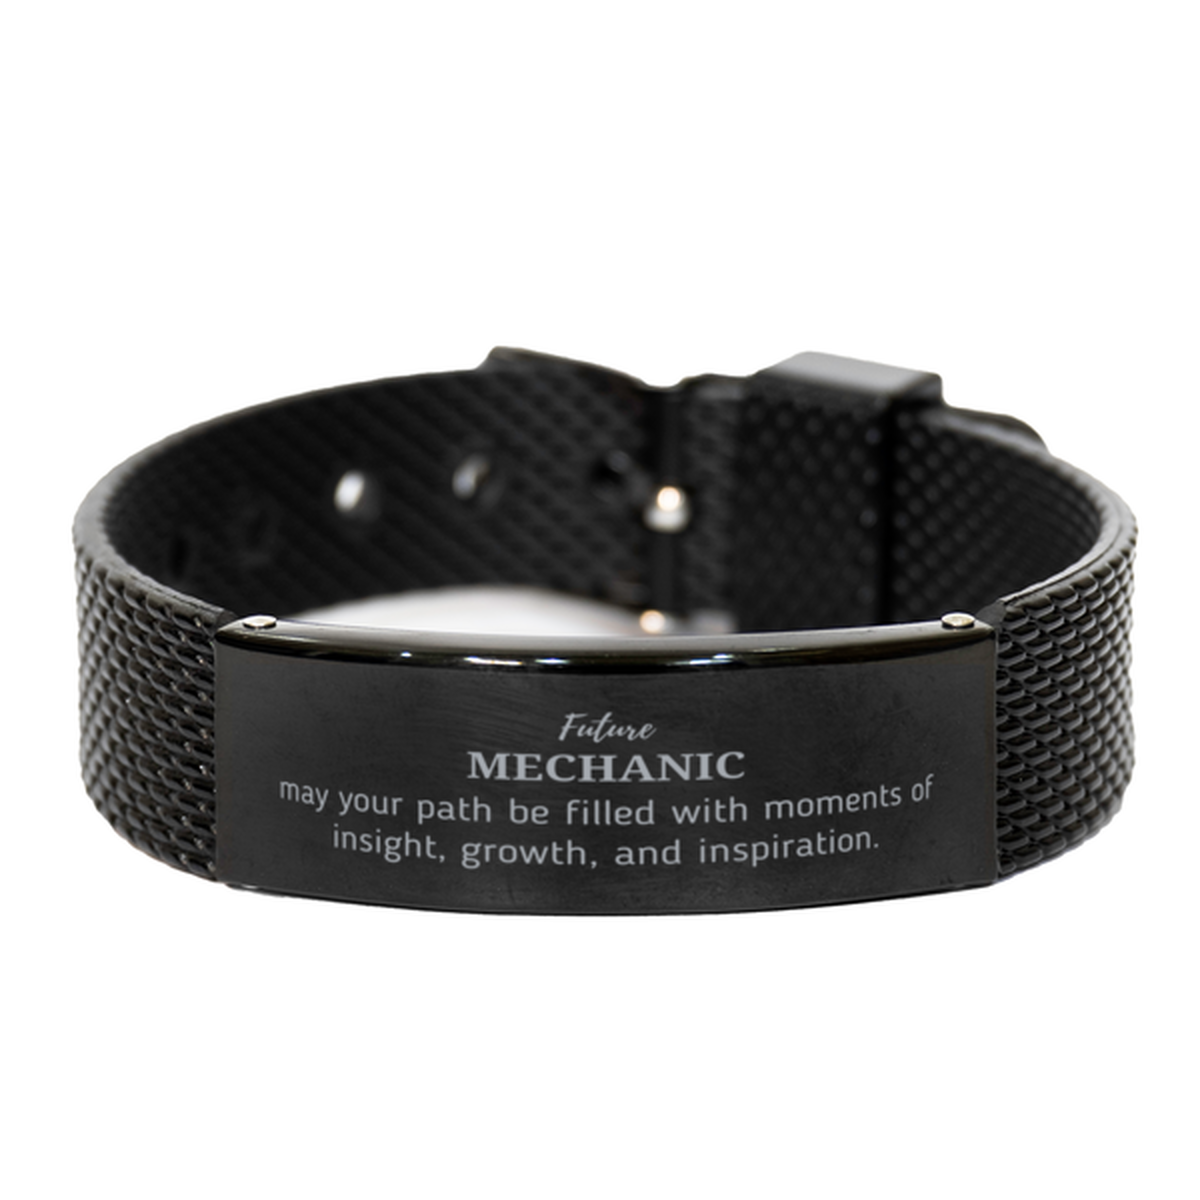 Future Mechanic Gifts, May your path be filled with moments of insight, Graduation Gifts for New Mechanic, Christmas Unique Black Shark Mesh Bracelet For Men, Women, Friends